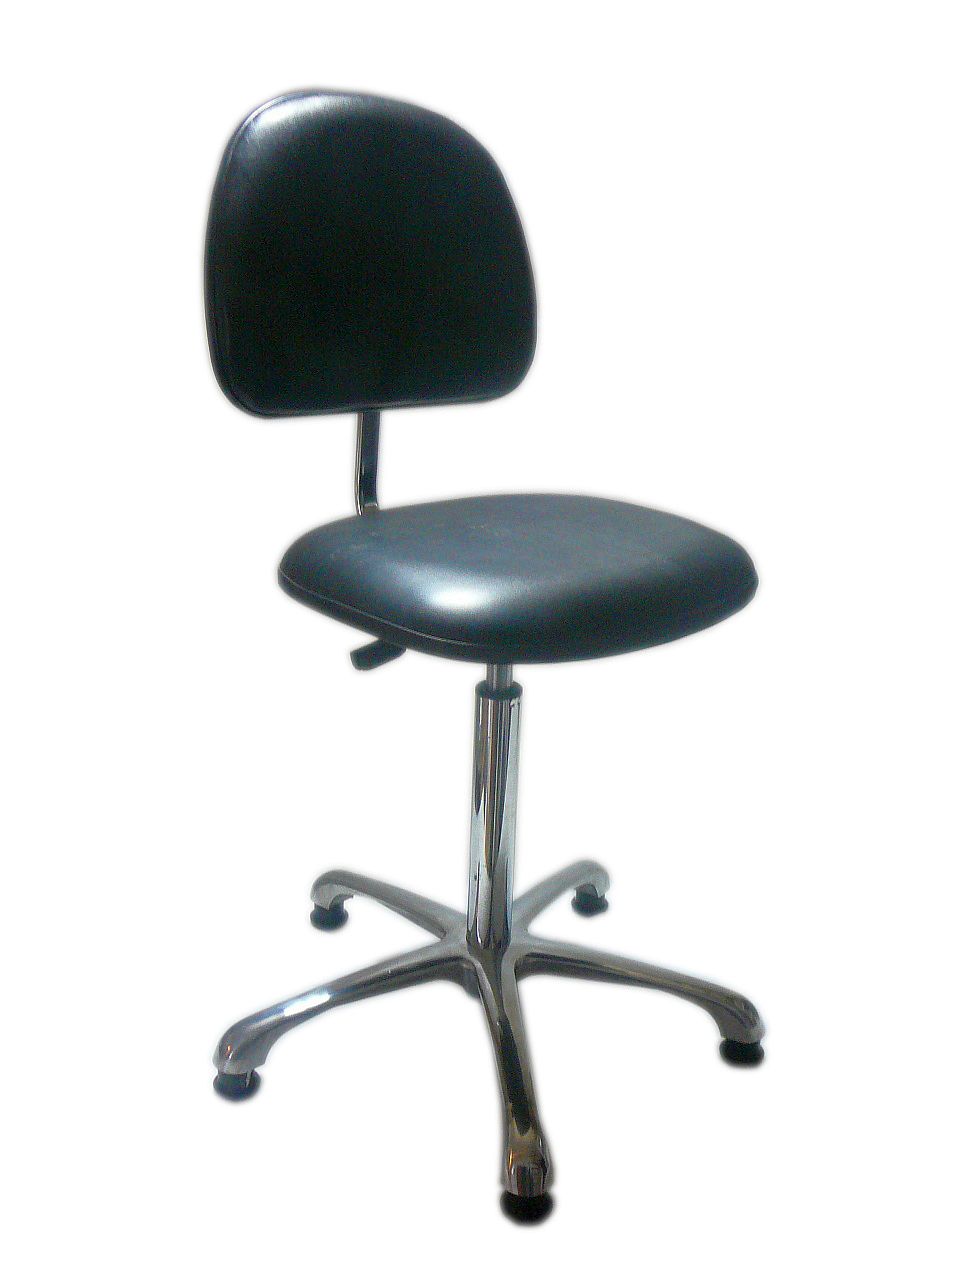 ESD Safe Vinyl Cleanroom Chair with gliders (all plastic casters)